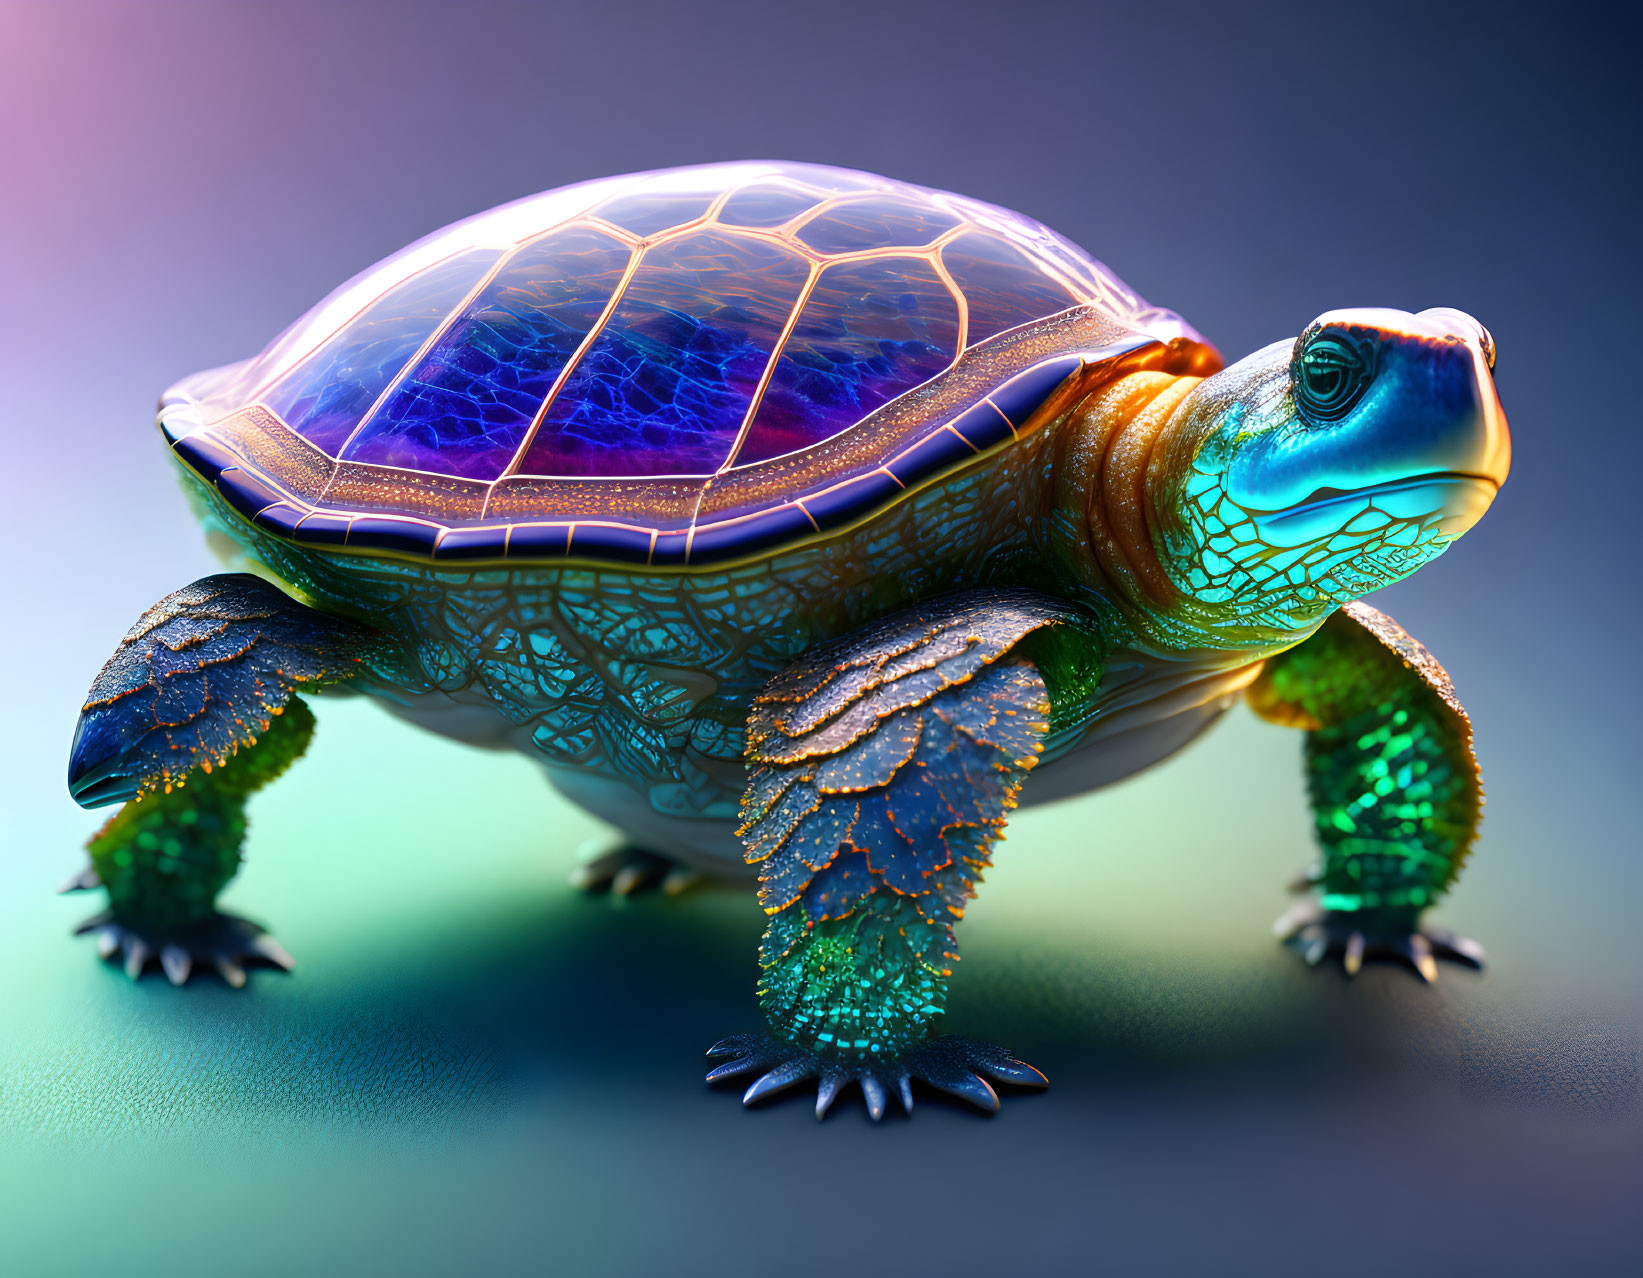 Colorful Digital Turtle Illustration with Iridescent Shell